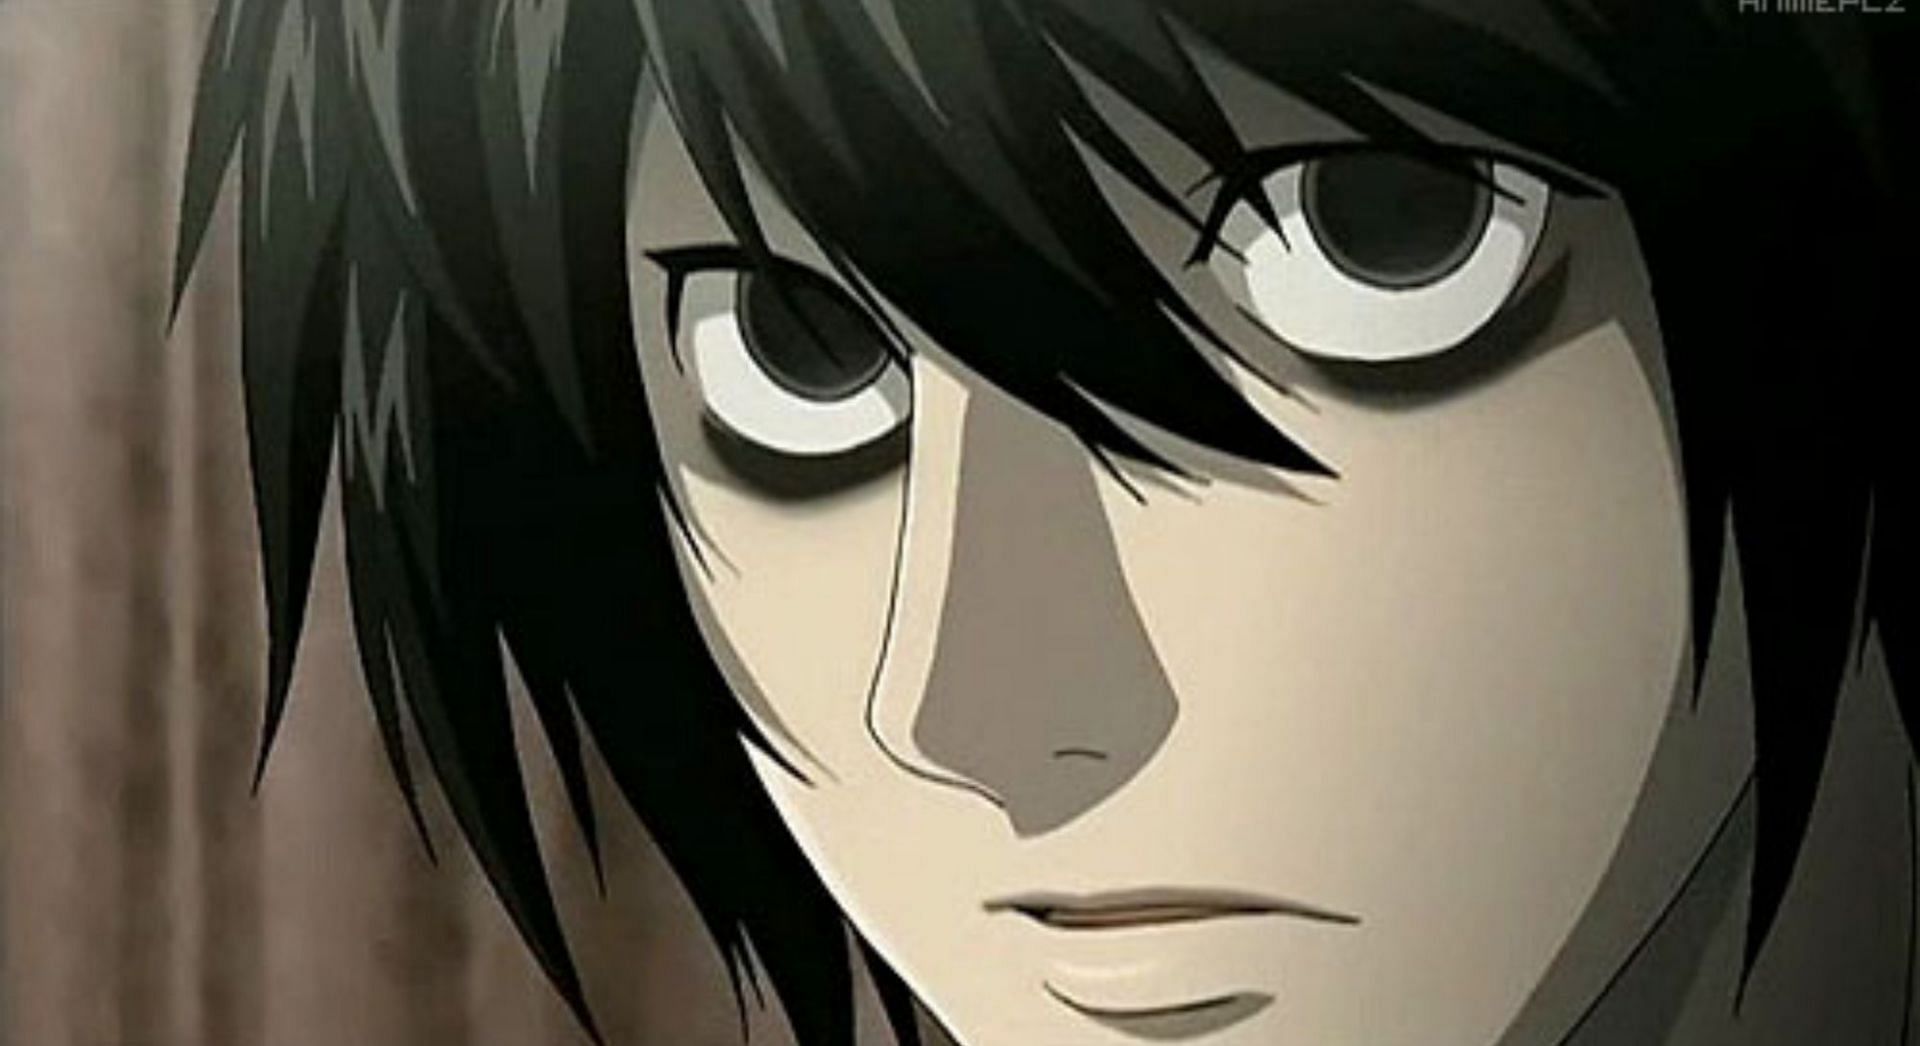 L, as seen in Death Note (Image via Studio Madhouse)